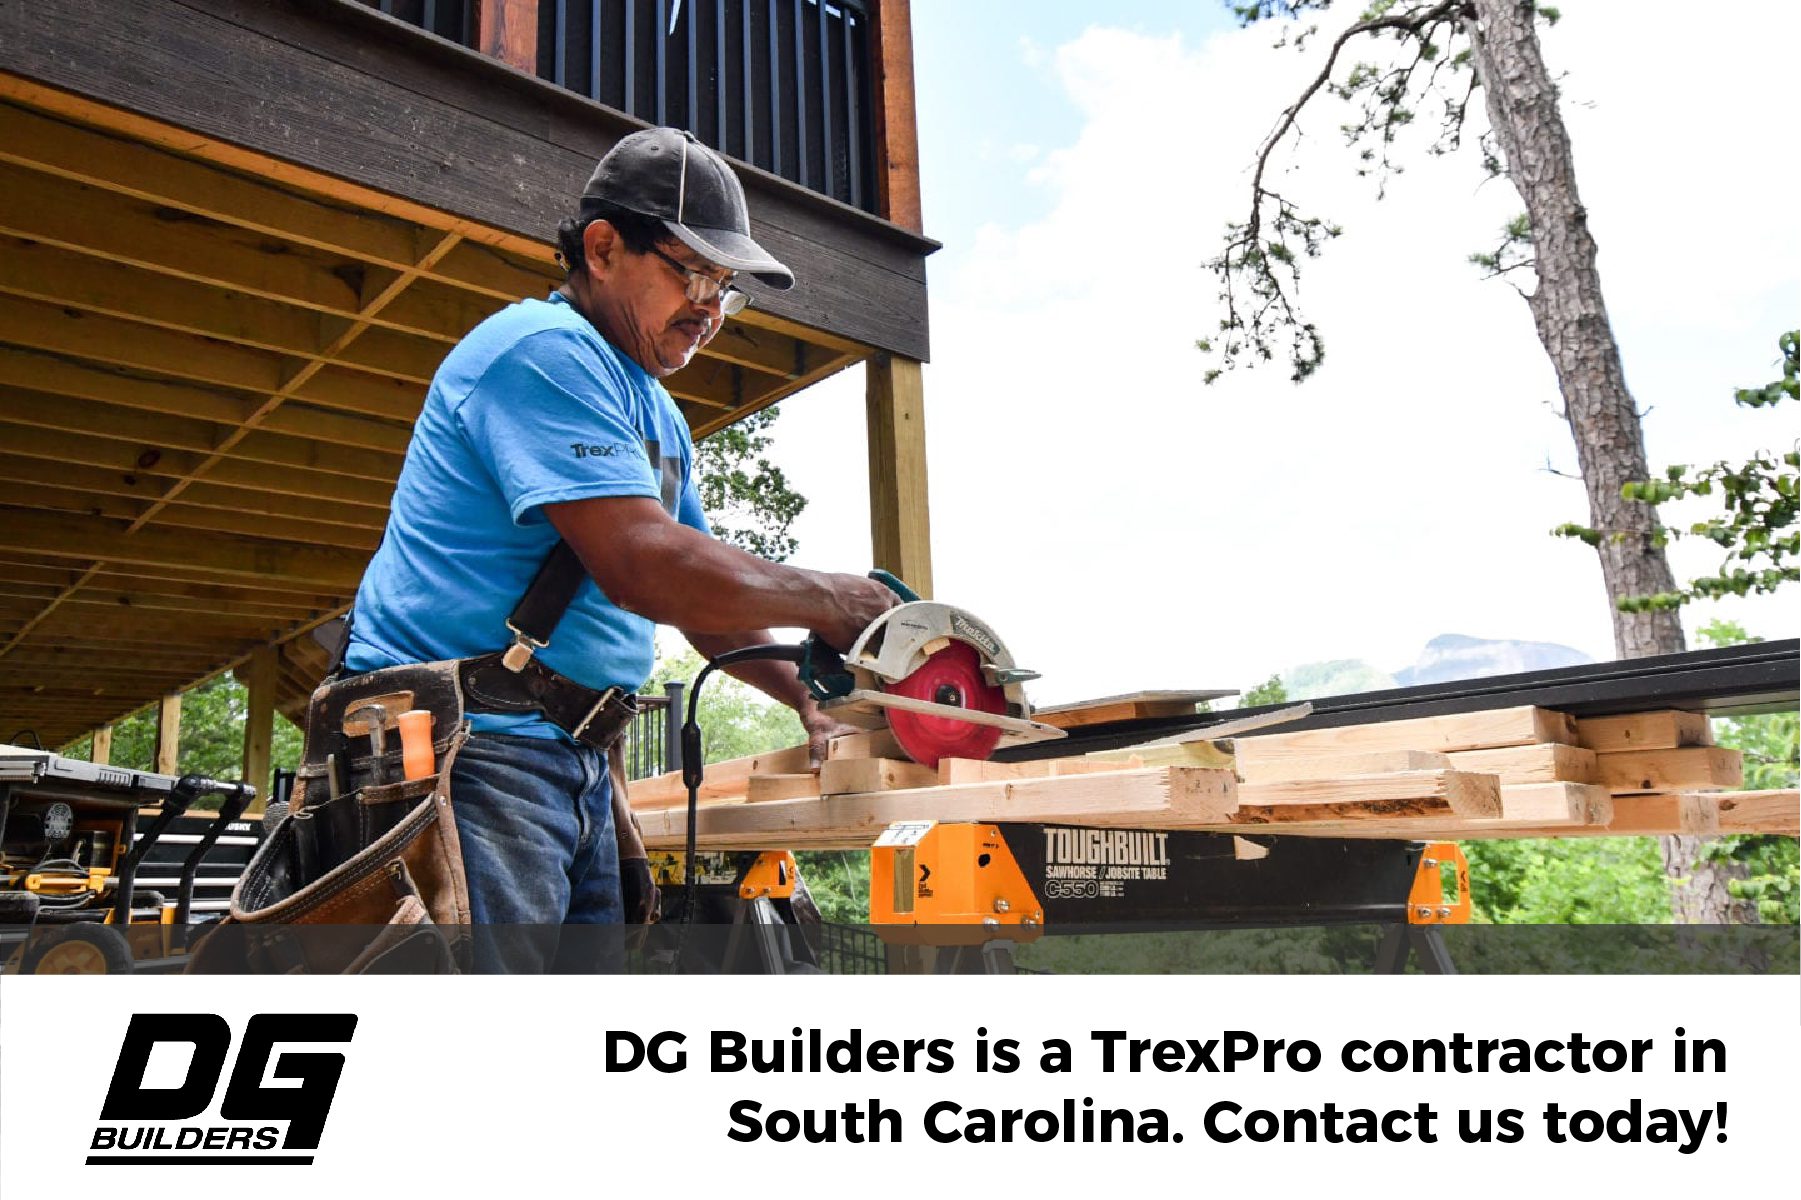 DG Builders is a Trexpro contractor in South Carolina